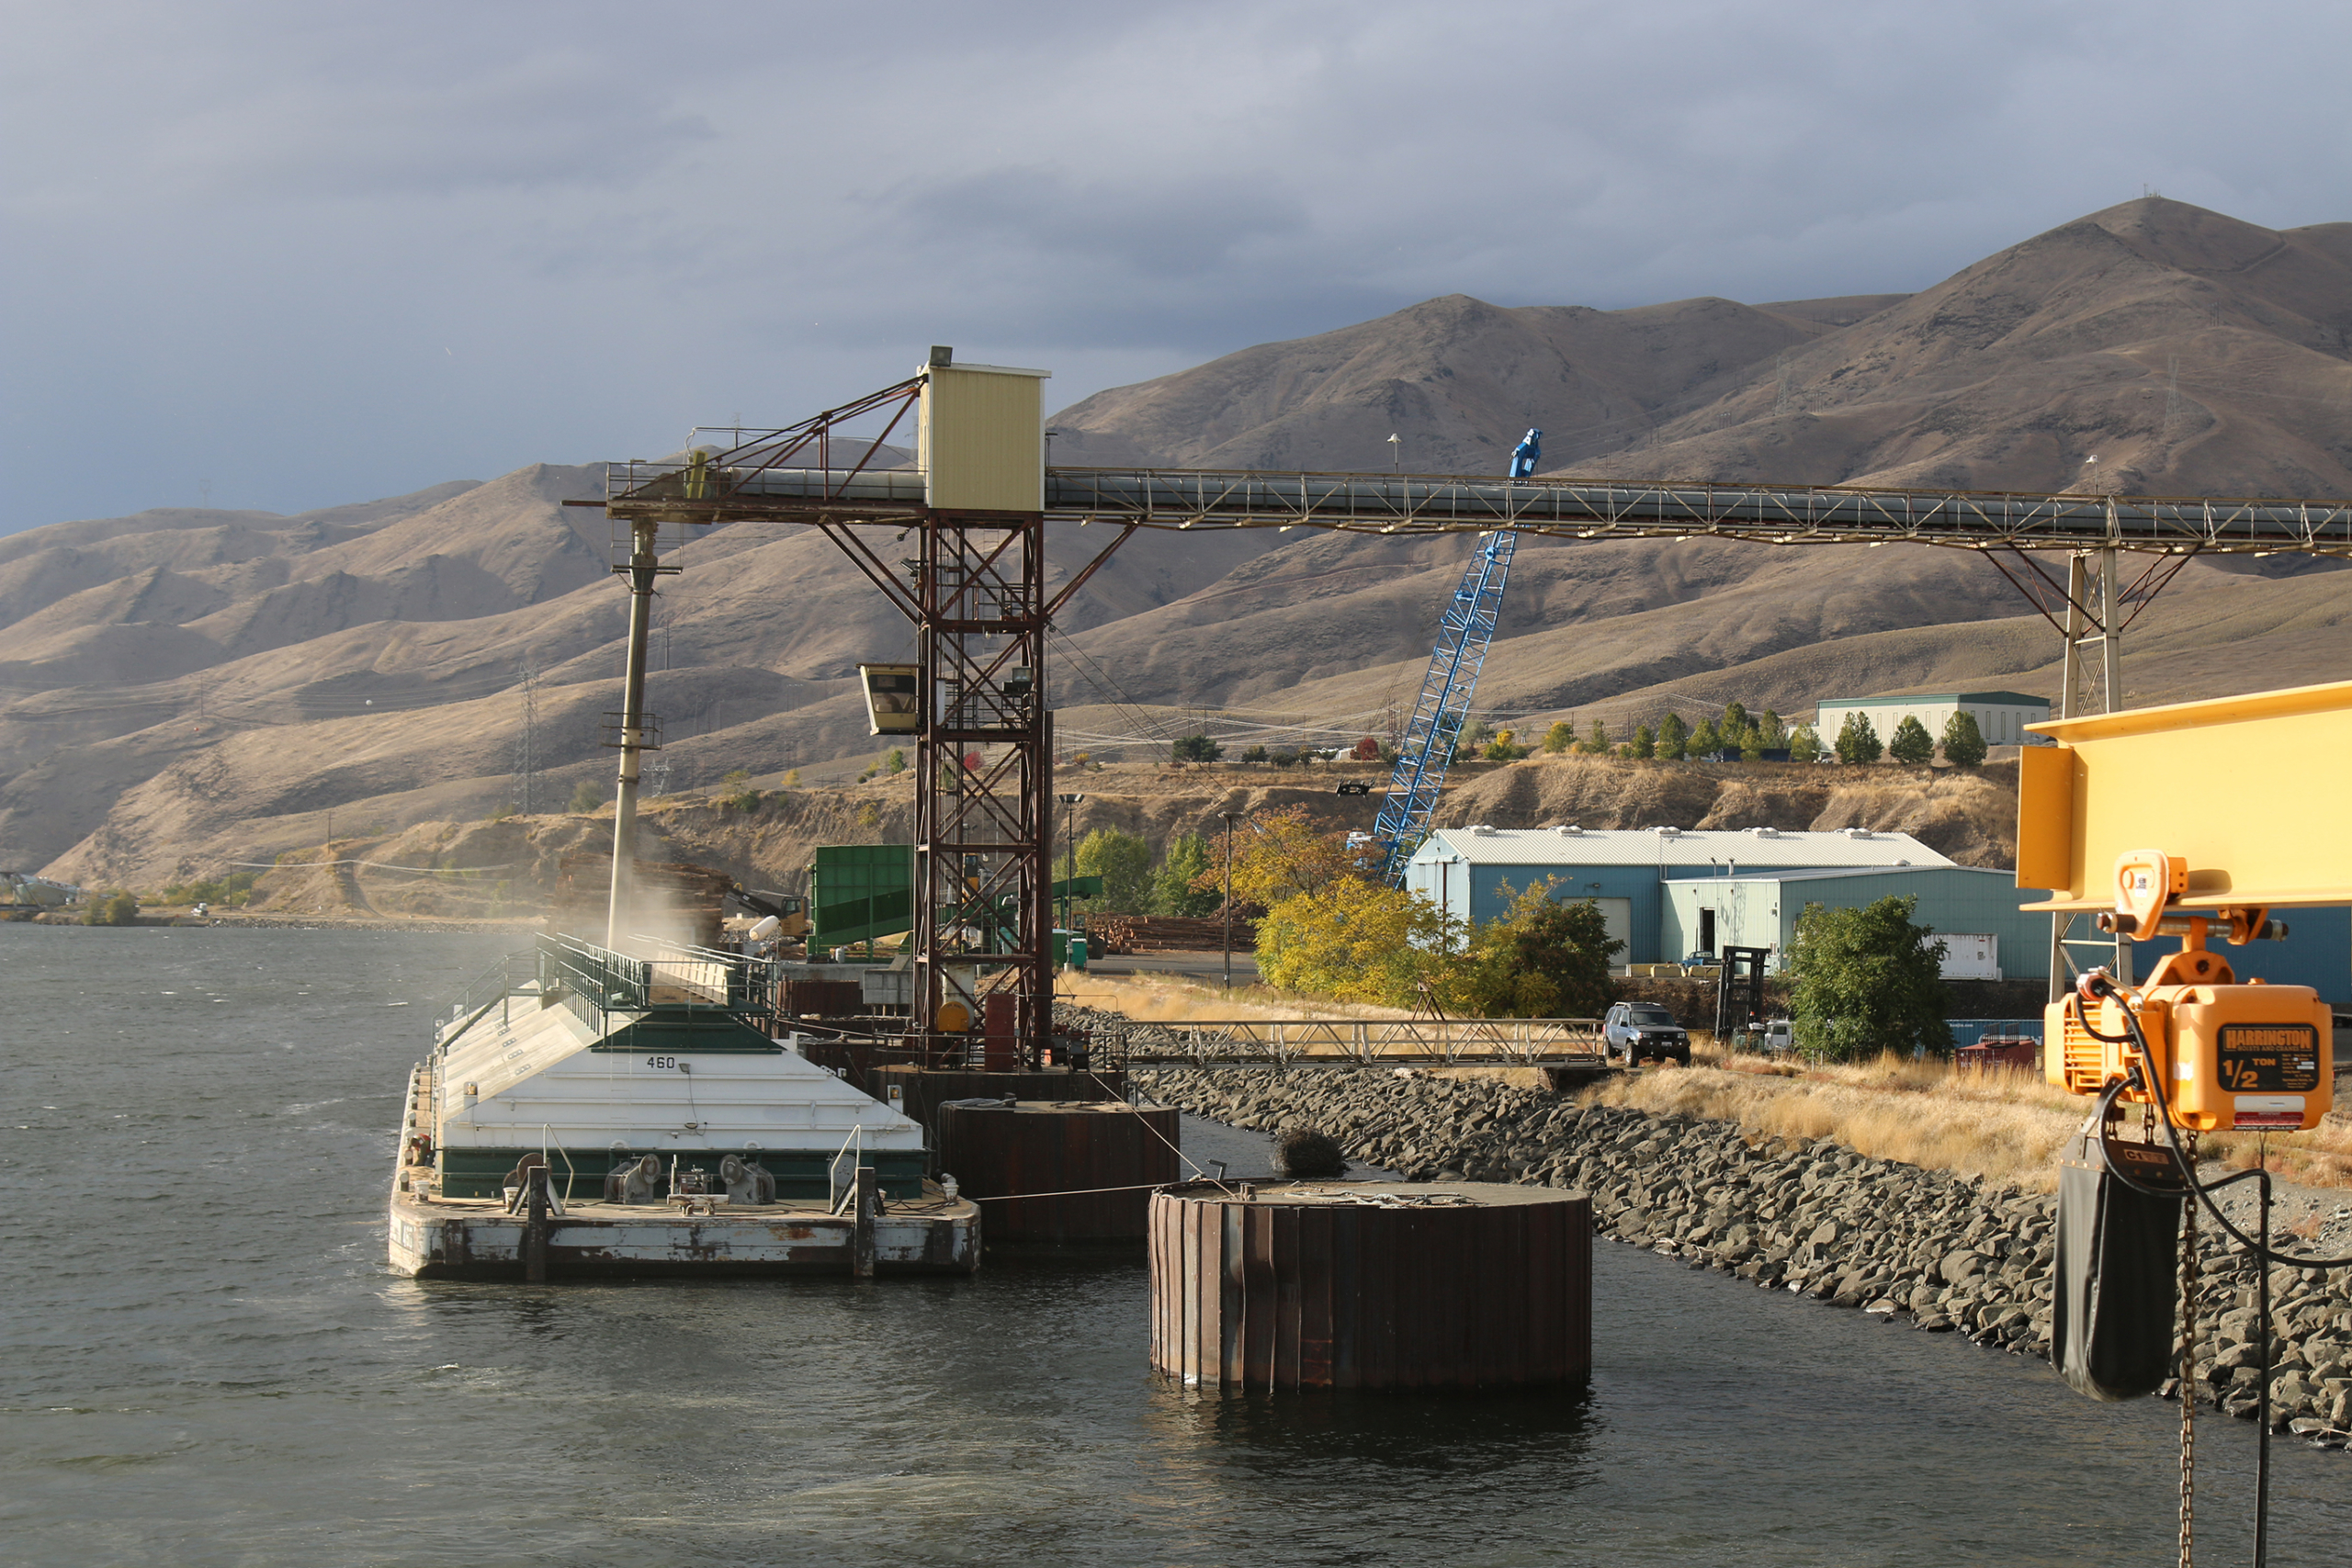 Barge loading facility on the Snake River in Washington to suggest global wheat market volatility